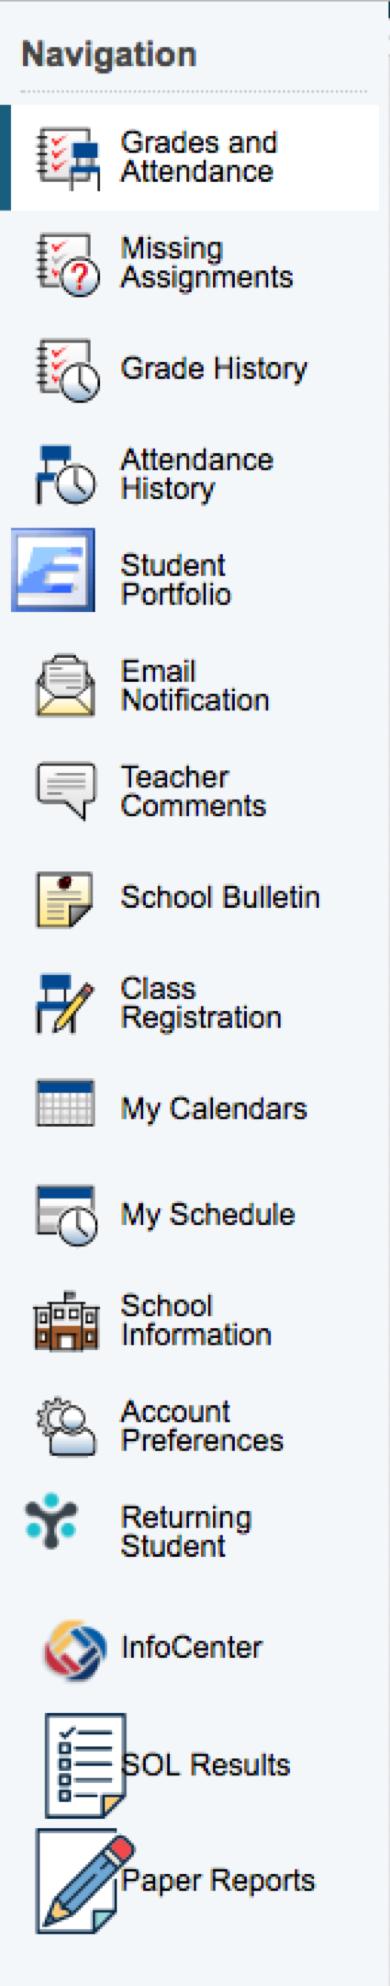 Navigation Menu - Serves as the central point from which to navigate the pages of the PowerSchool Parent Portal. 1.